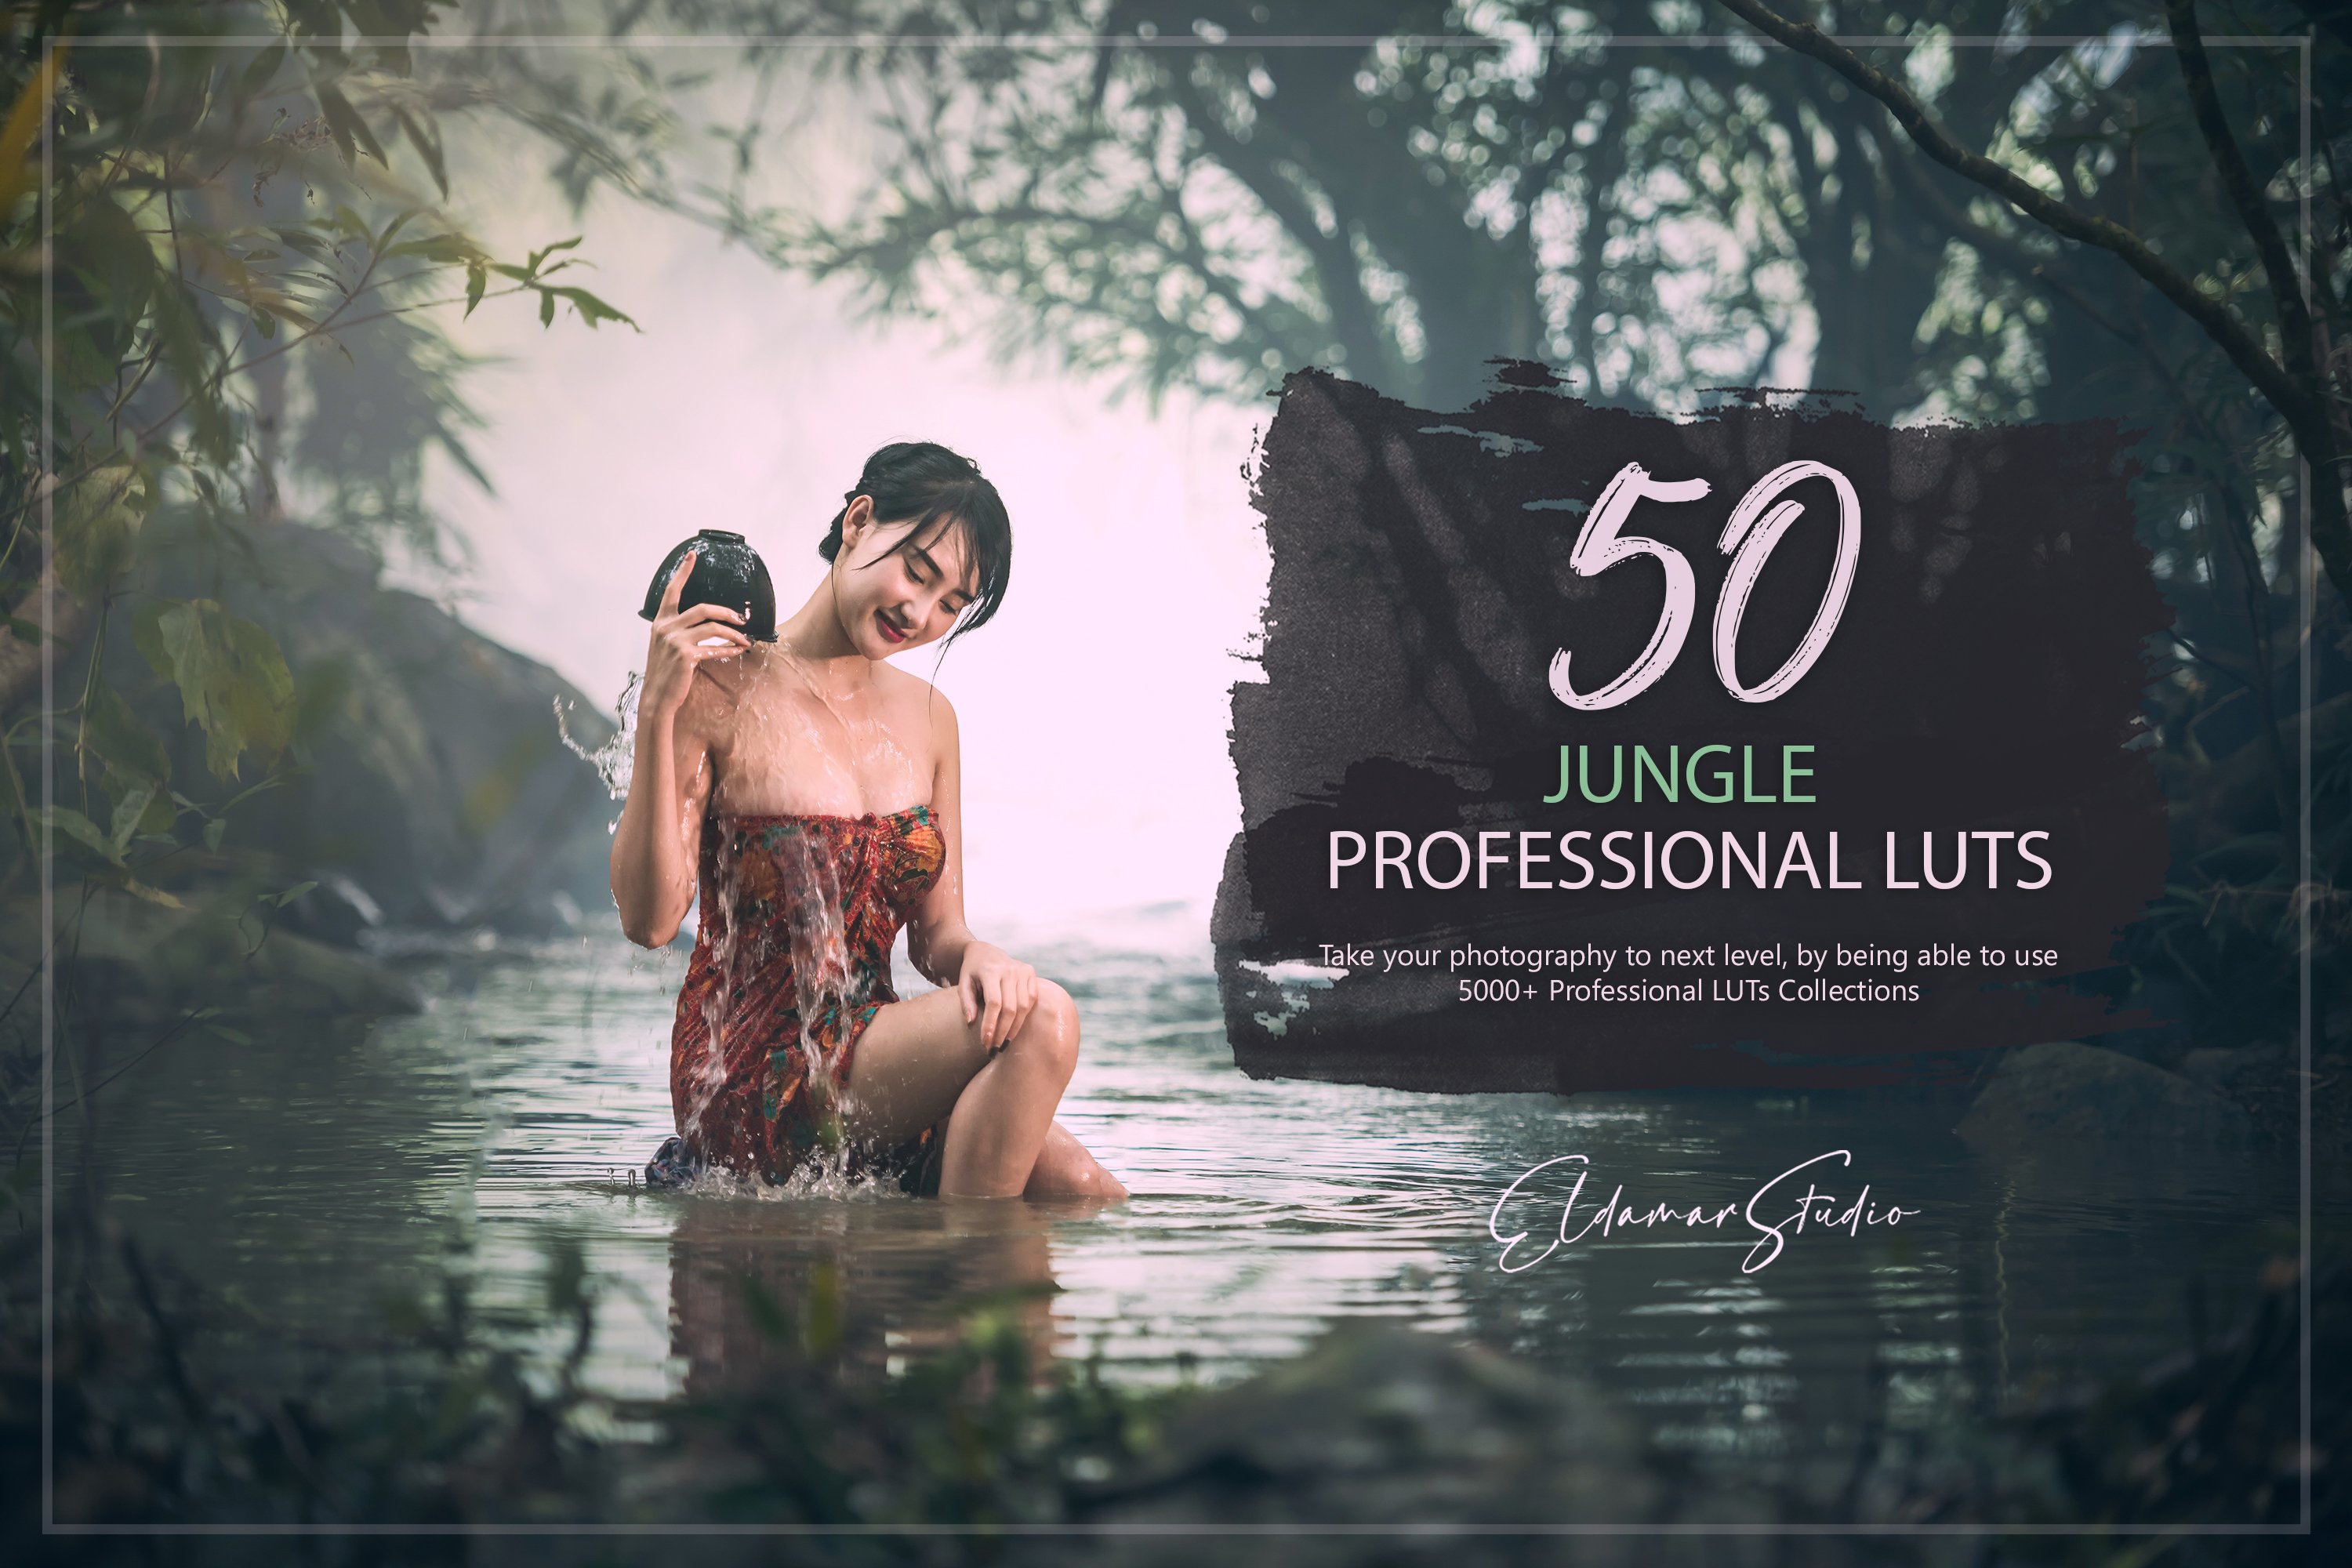 50 Jungle LUTs Packcover image.